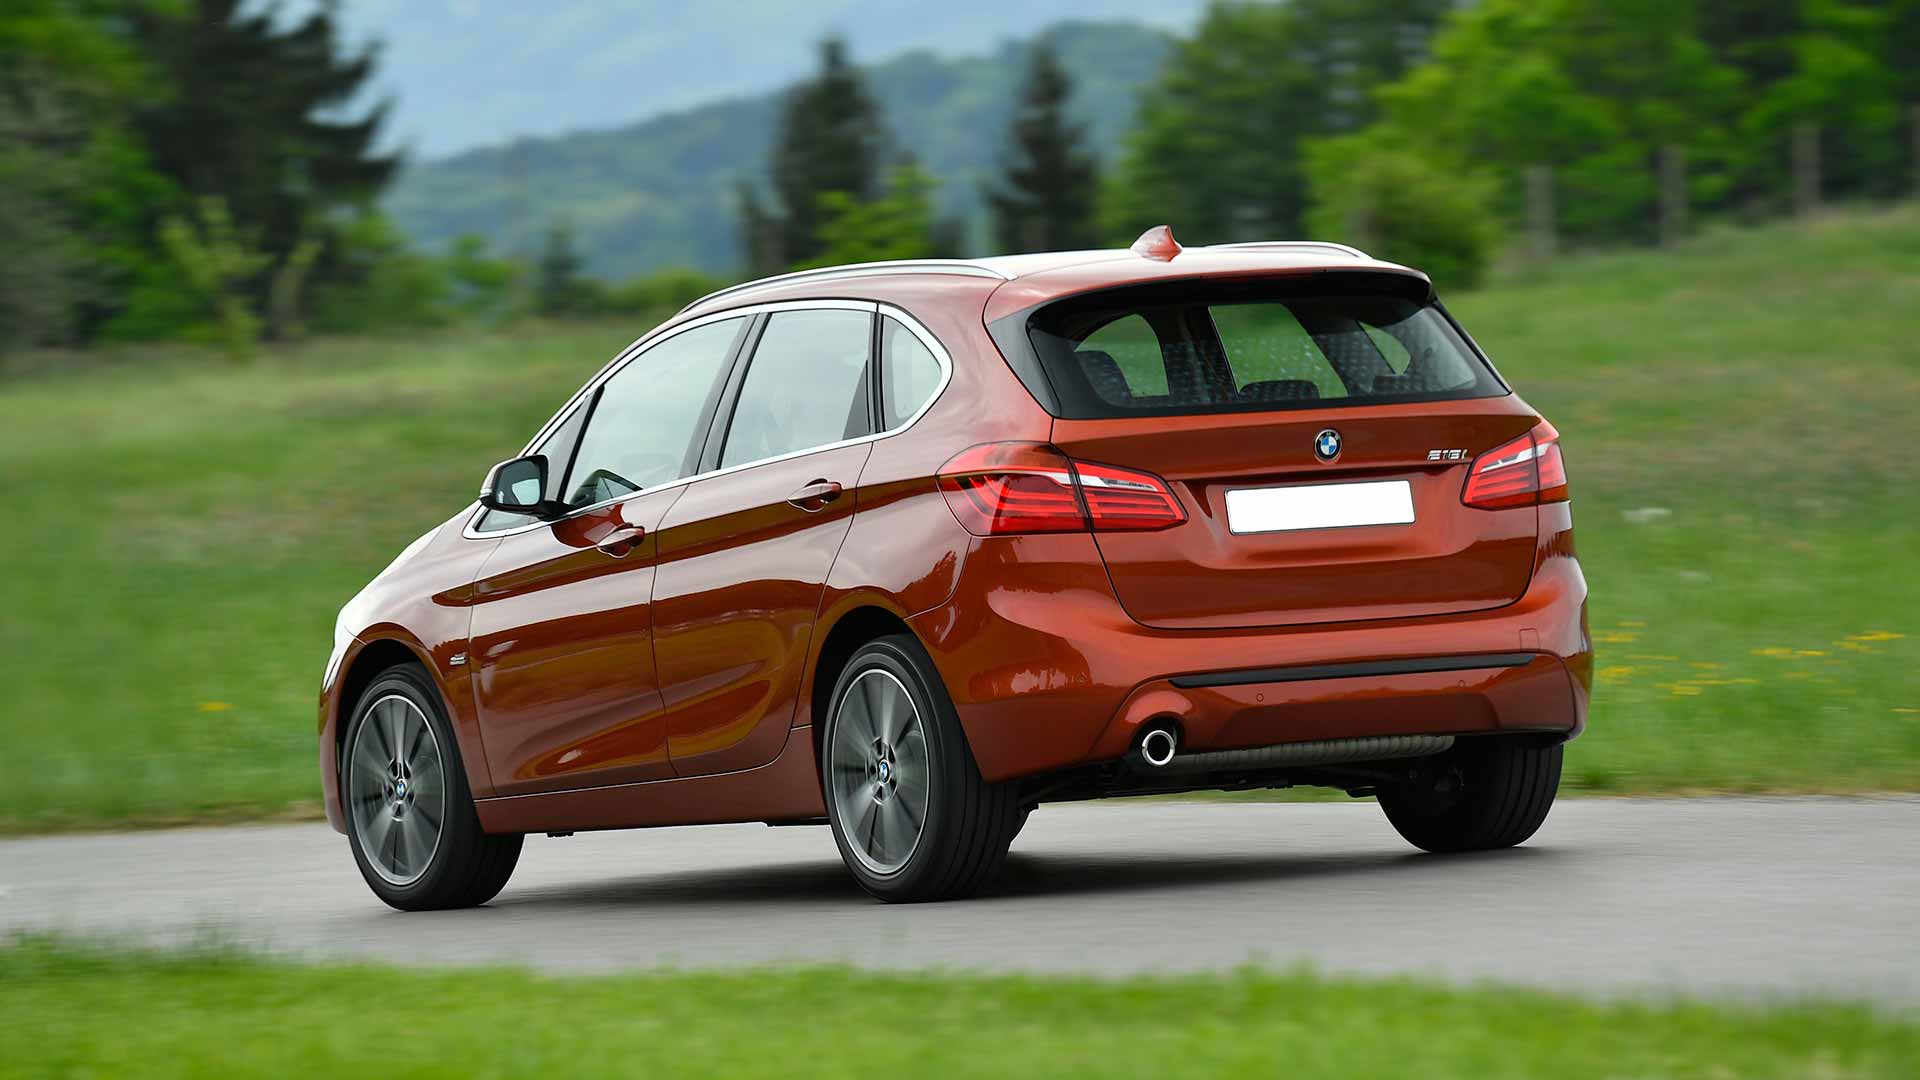 6 Must Knows About the BMW 2 Series Active Tourer